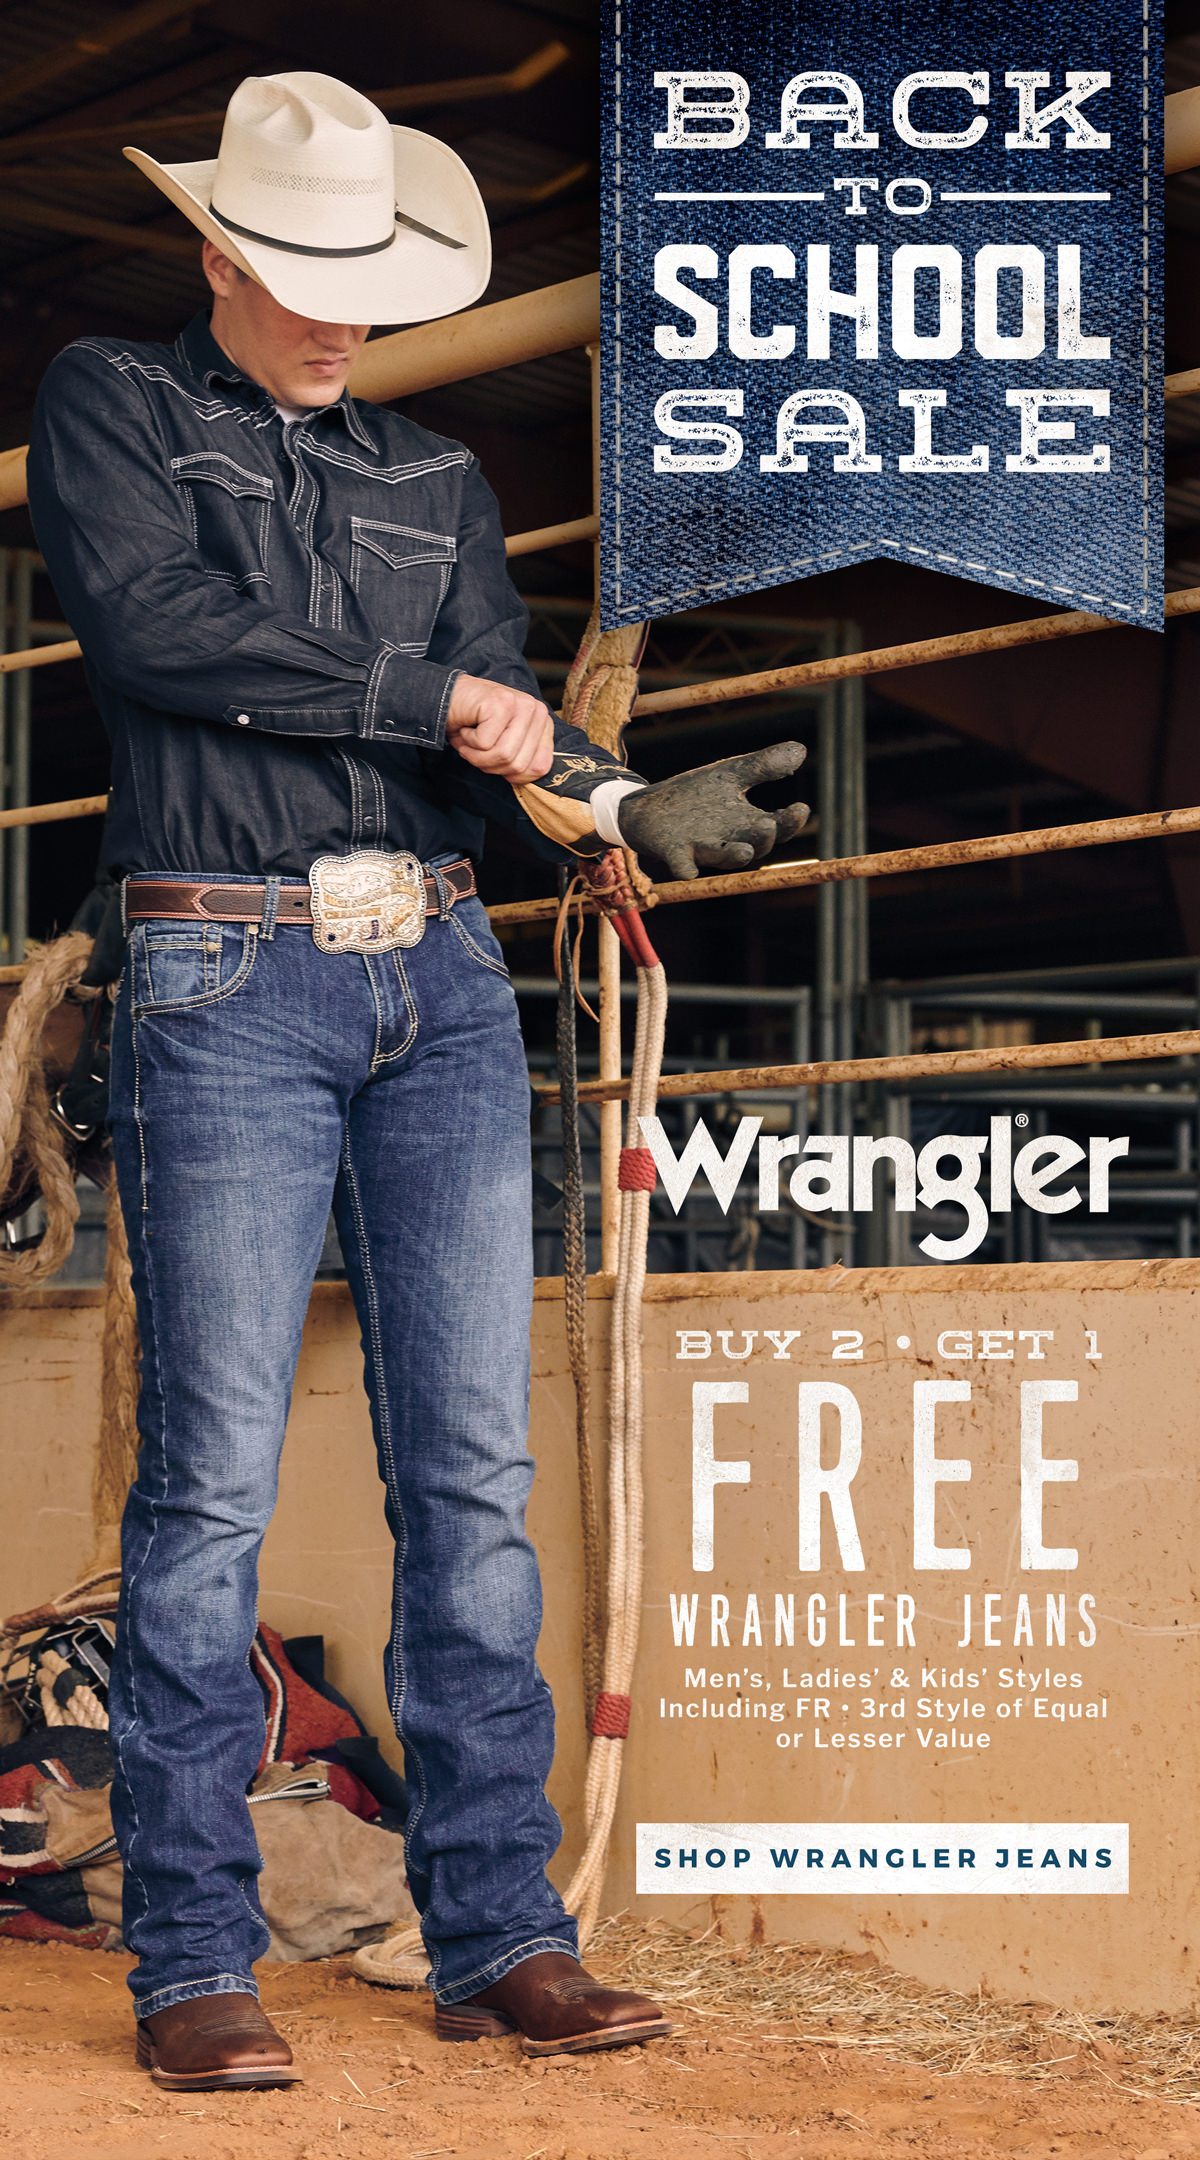 Stock Up On Wrangler Jeans - Buy 2, Get 1 Free! - Cavender's Email Archive